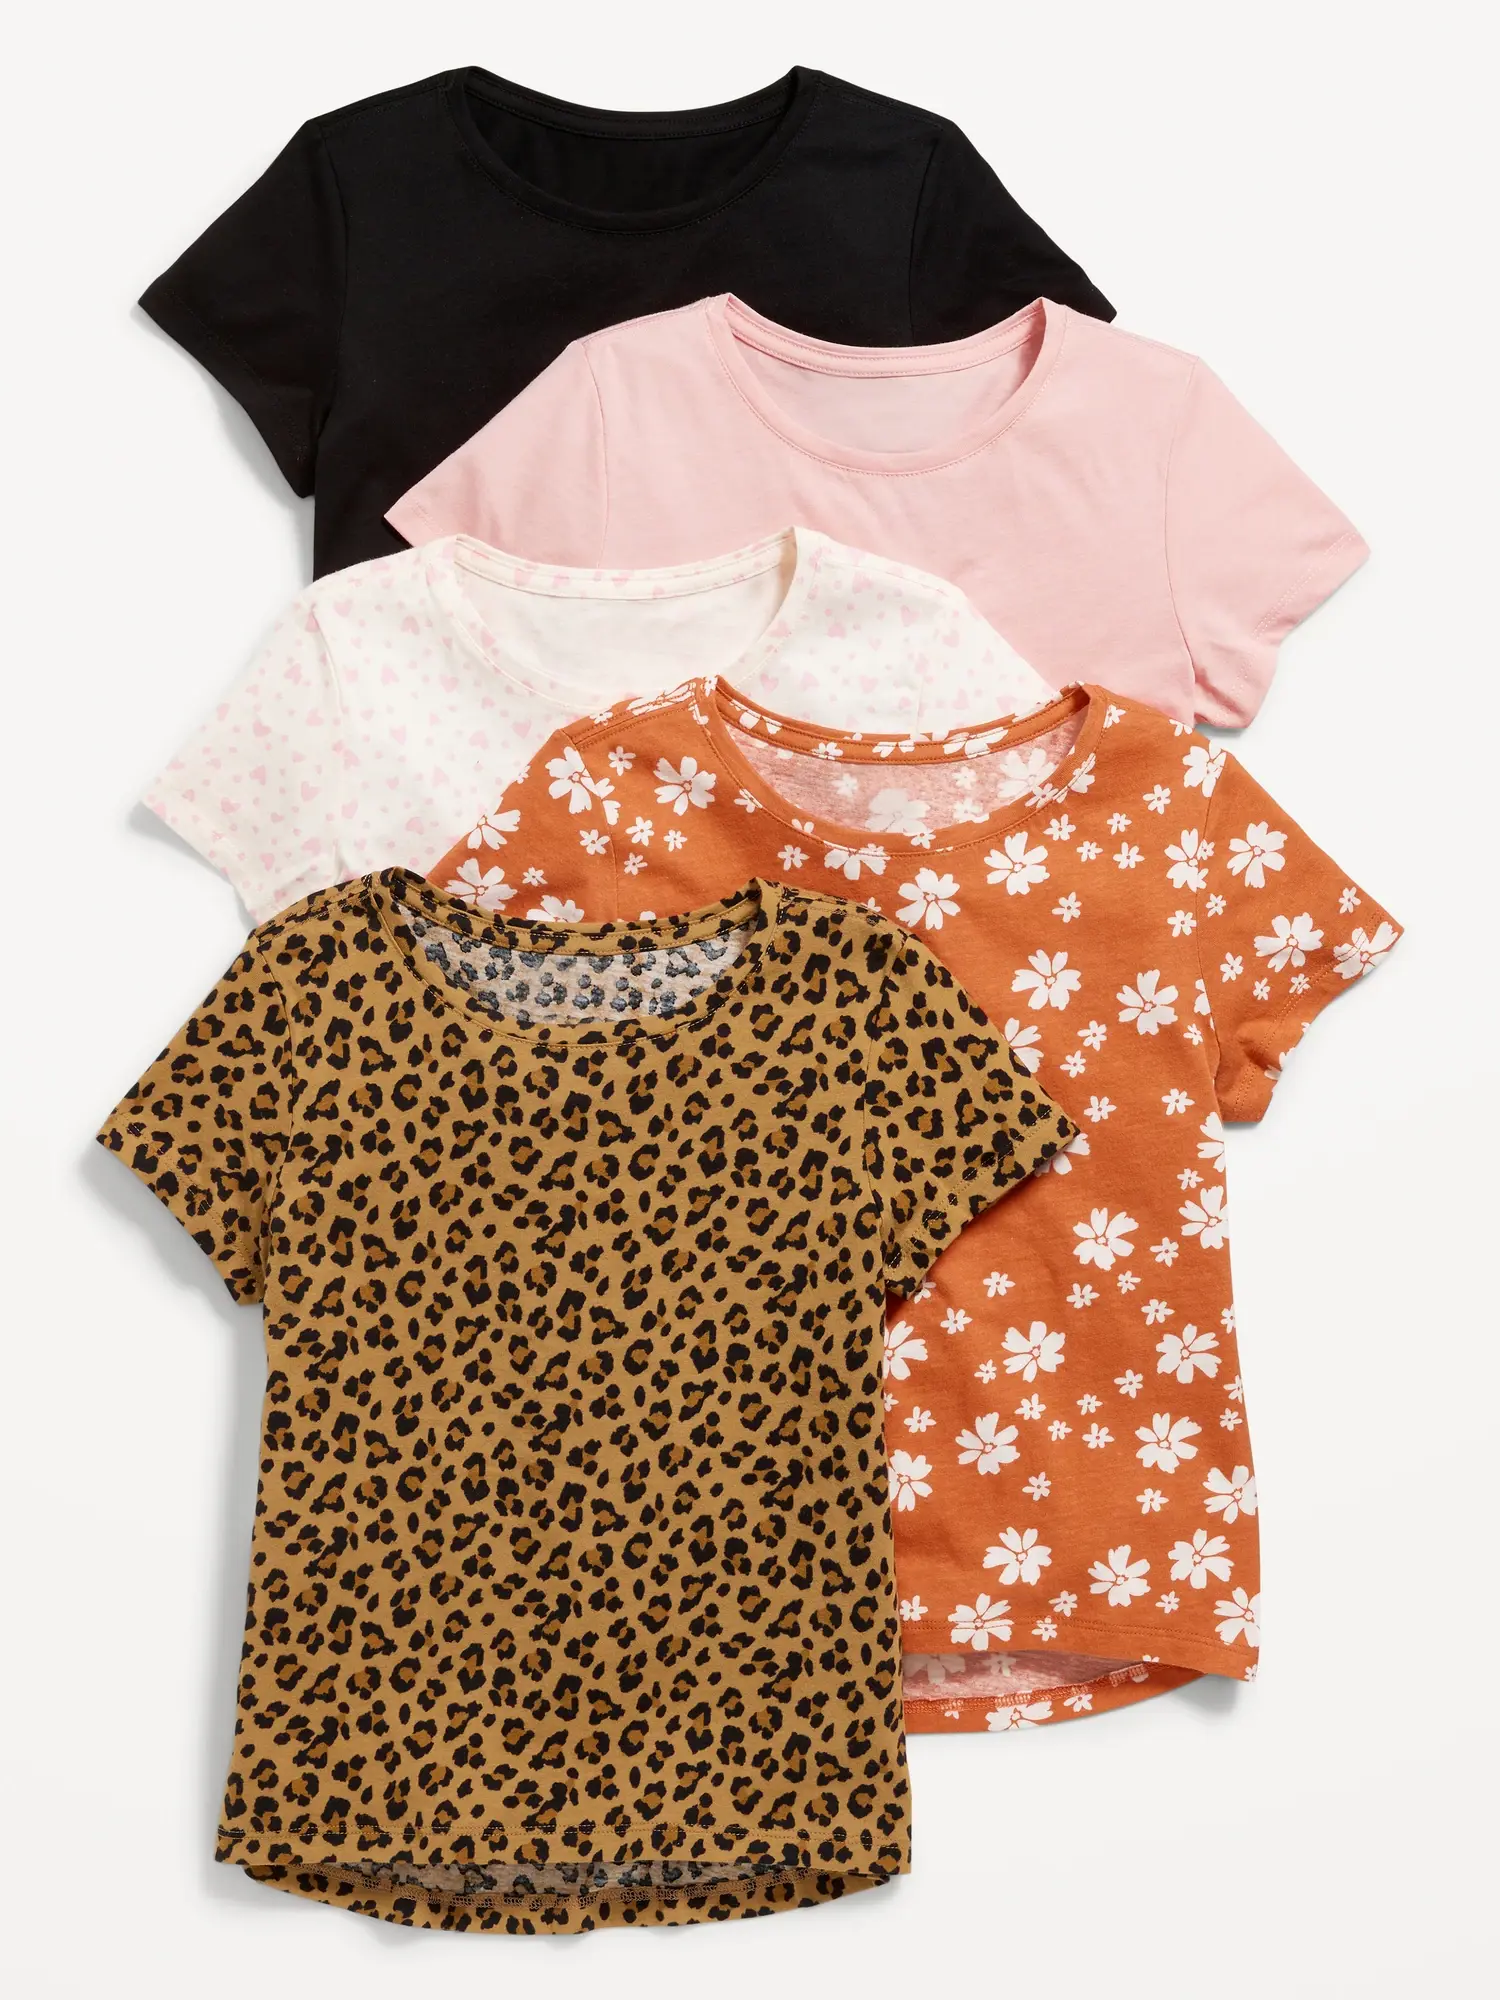 Old Navy Softest Printed T-Shirt 5-Pack for Girls multi. 1